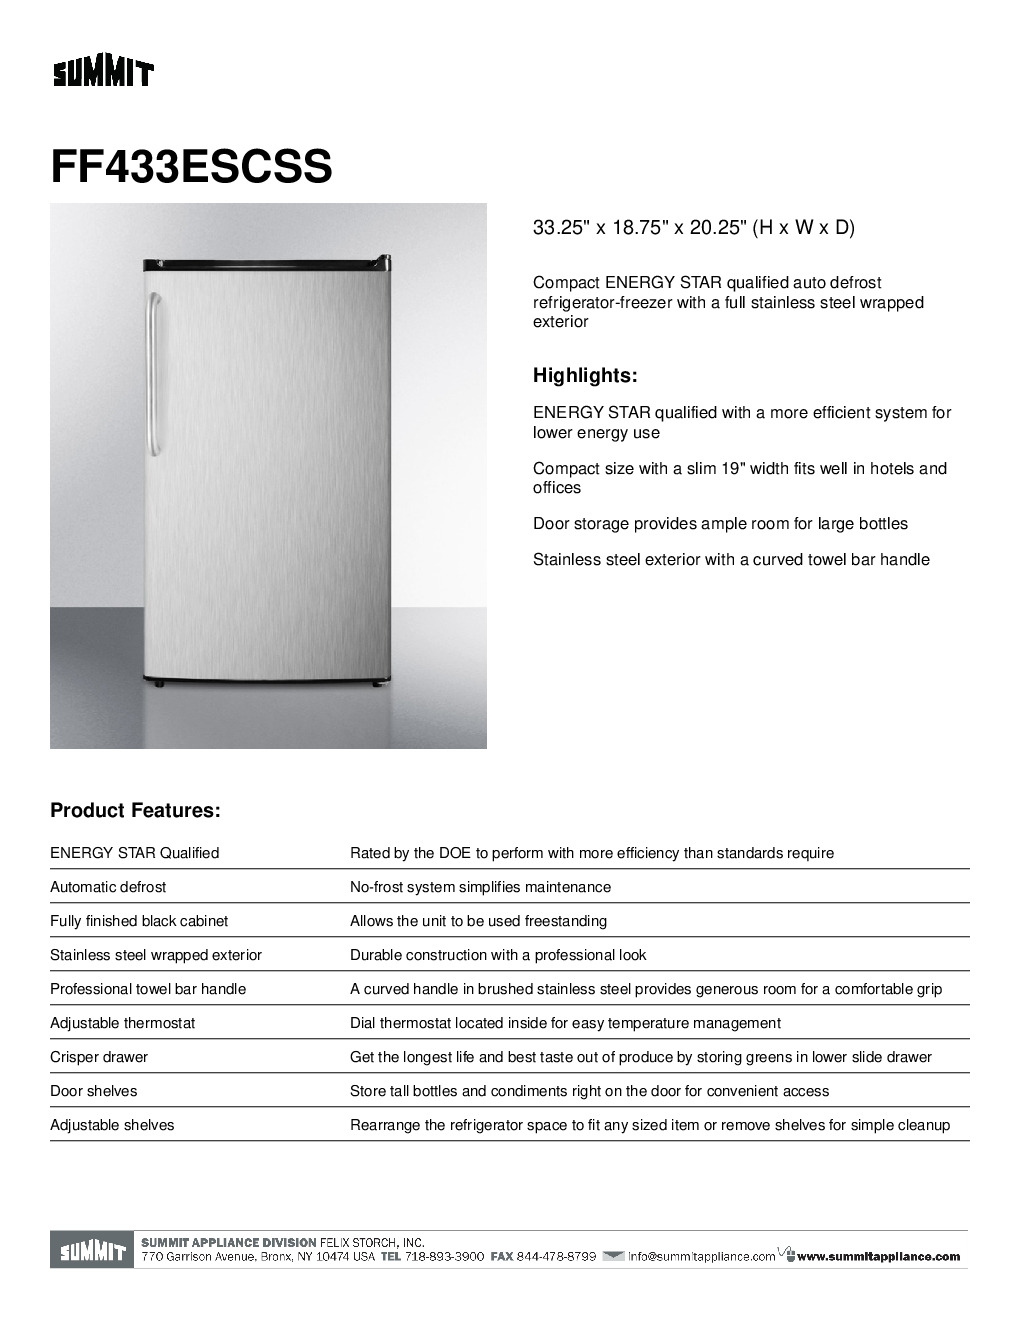 Summit FF433ESCSS One Section Reach-In Refrigerator Freezer, 3.6 cu. ft.